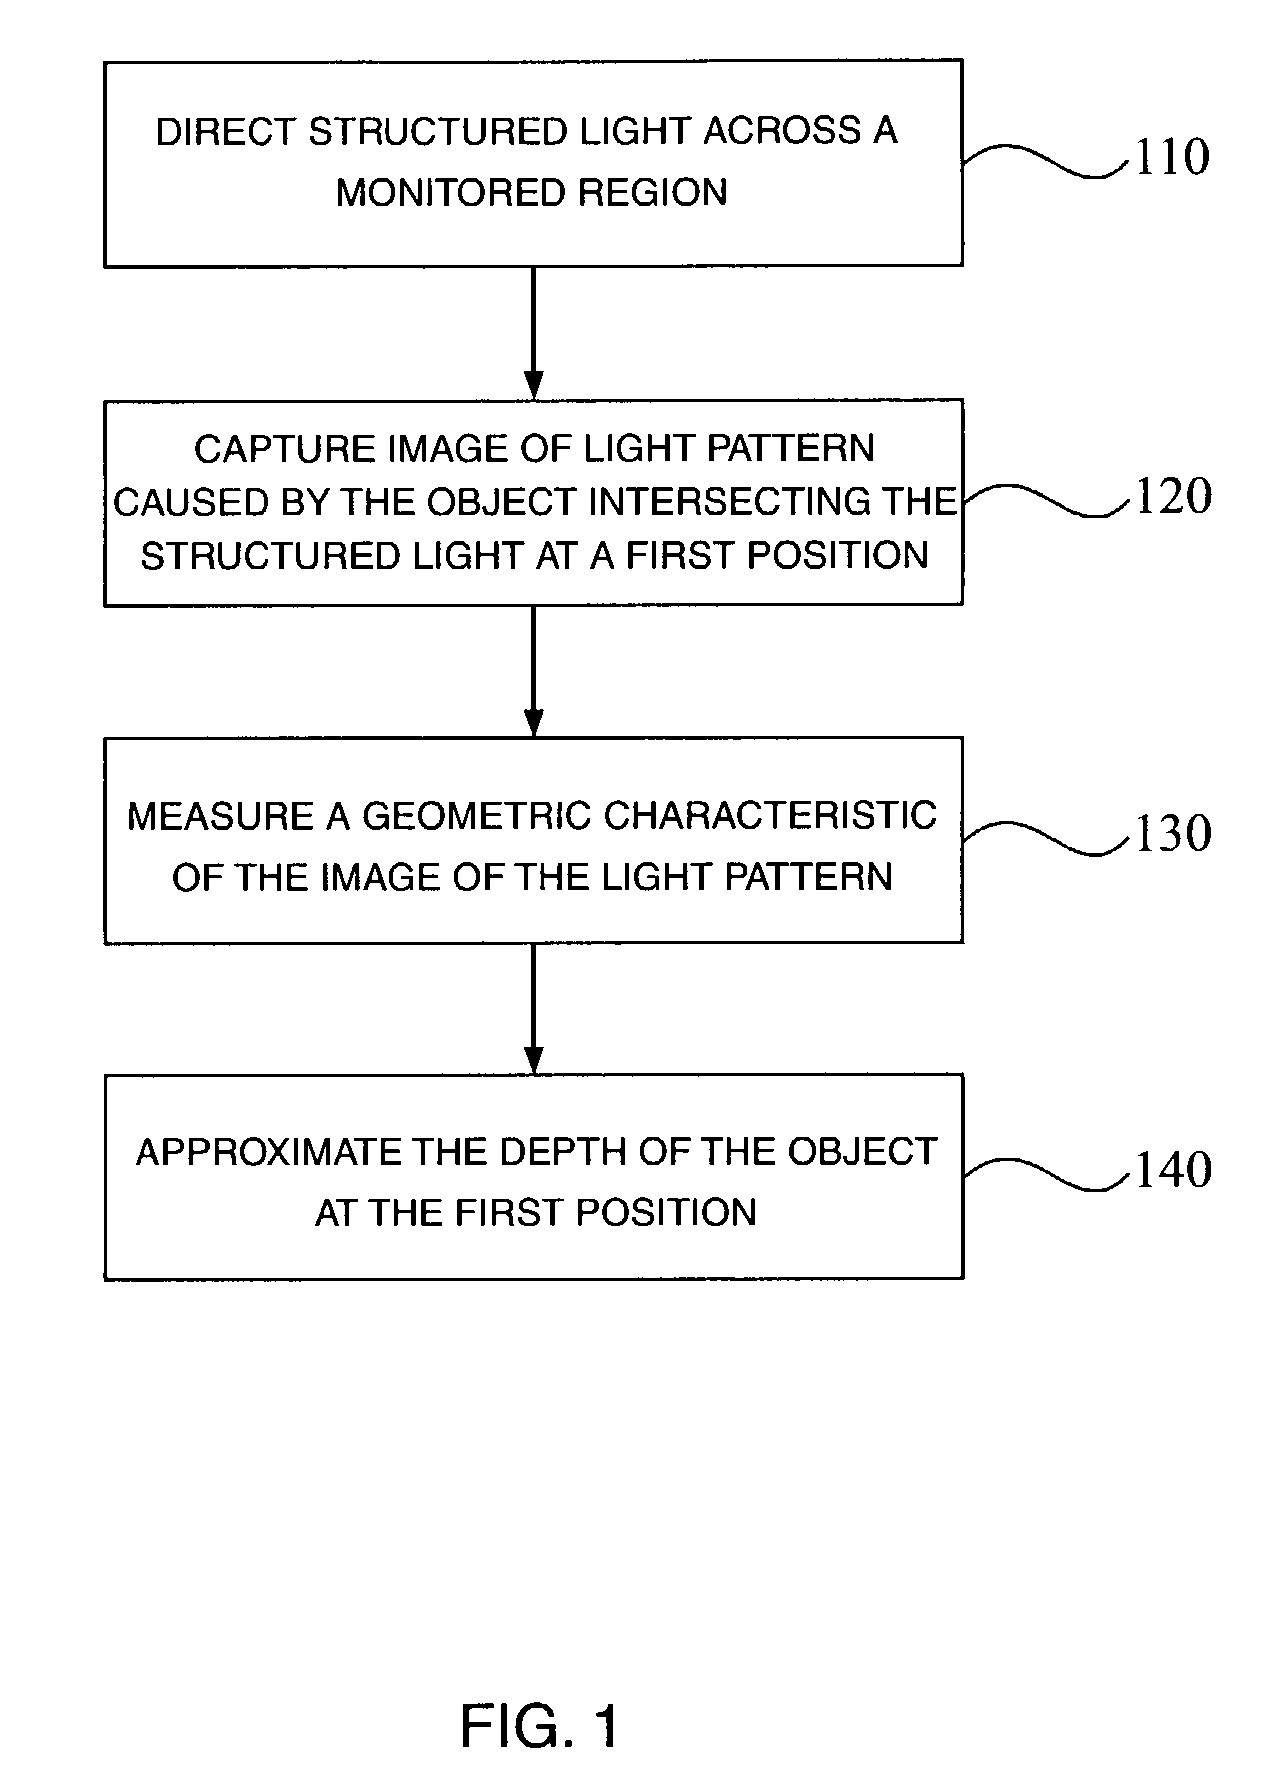 Method and apparatus for approximating depth of an object's placement onto a monitored region with applications to virtual interface devices